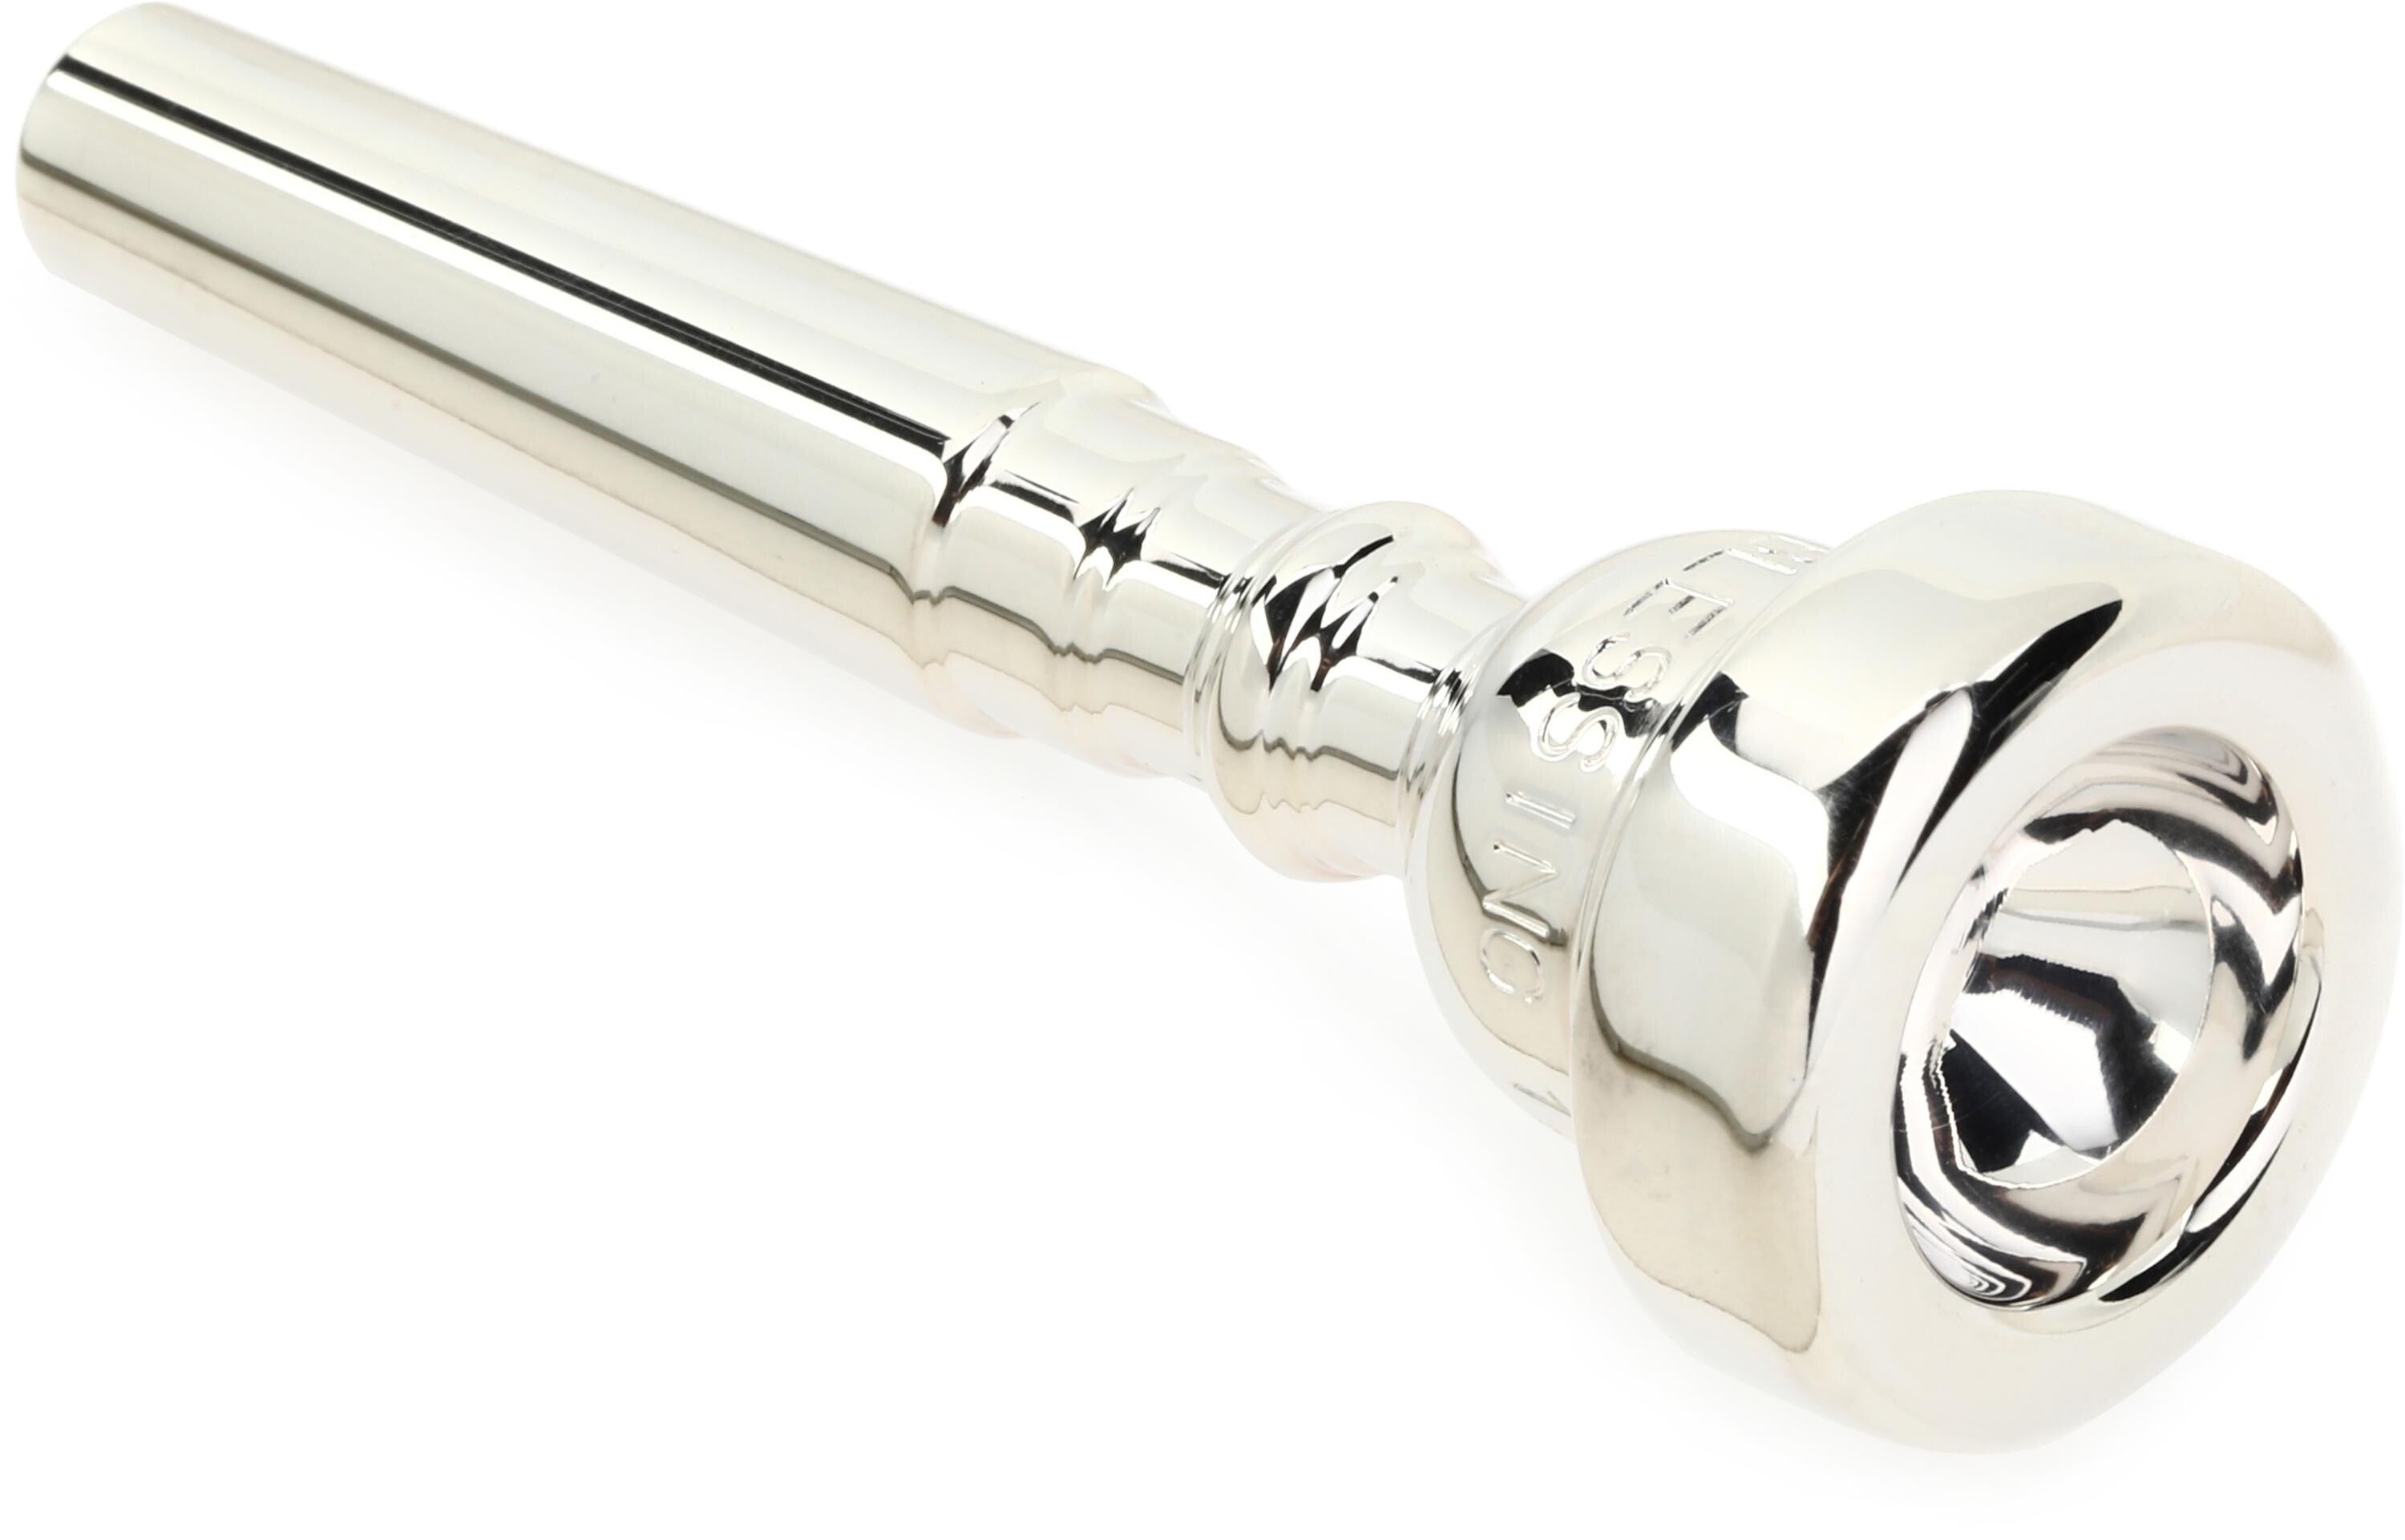 Blessing MPC15CTR Trumpet Mouthpiece - 1.5C | Sweetwater